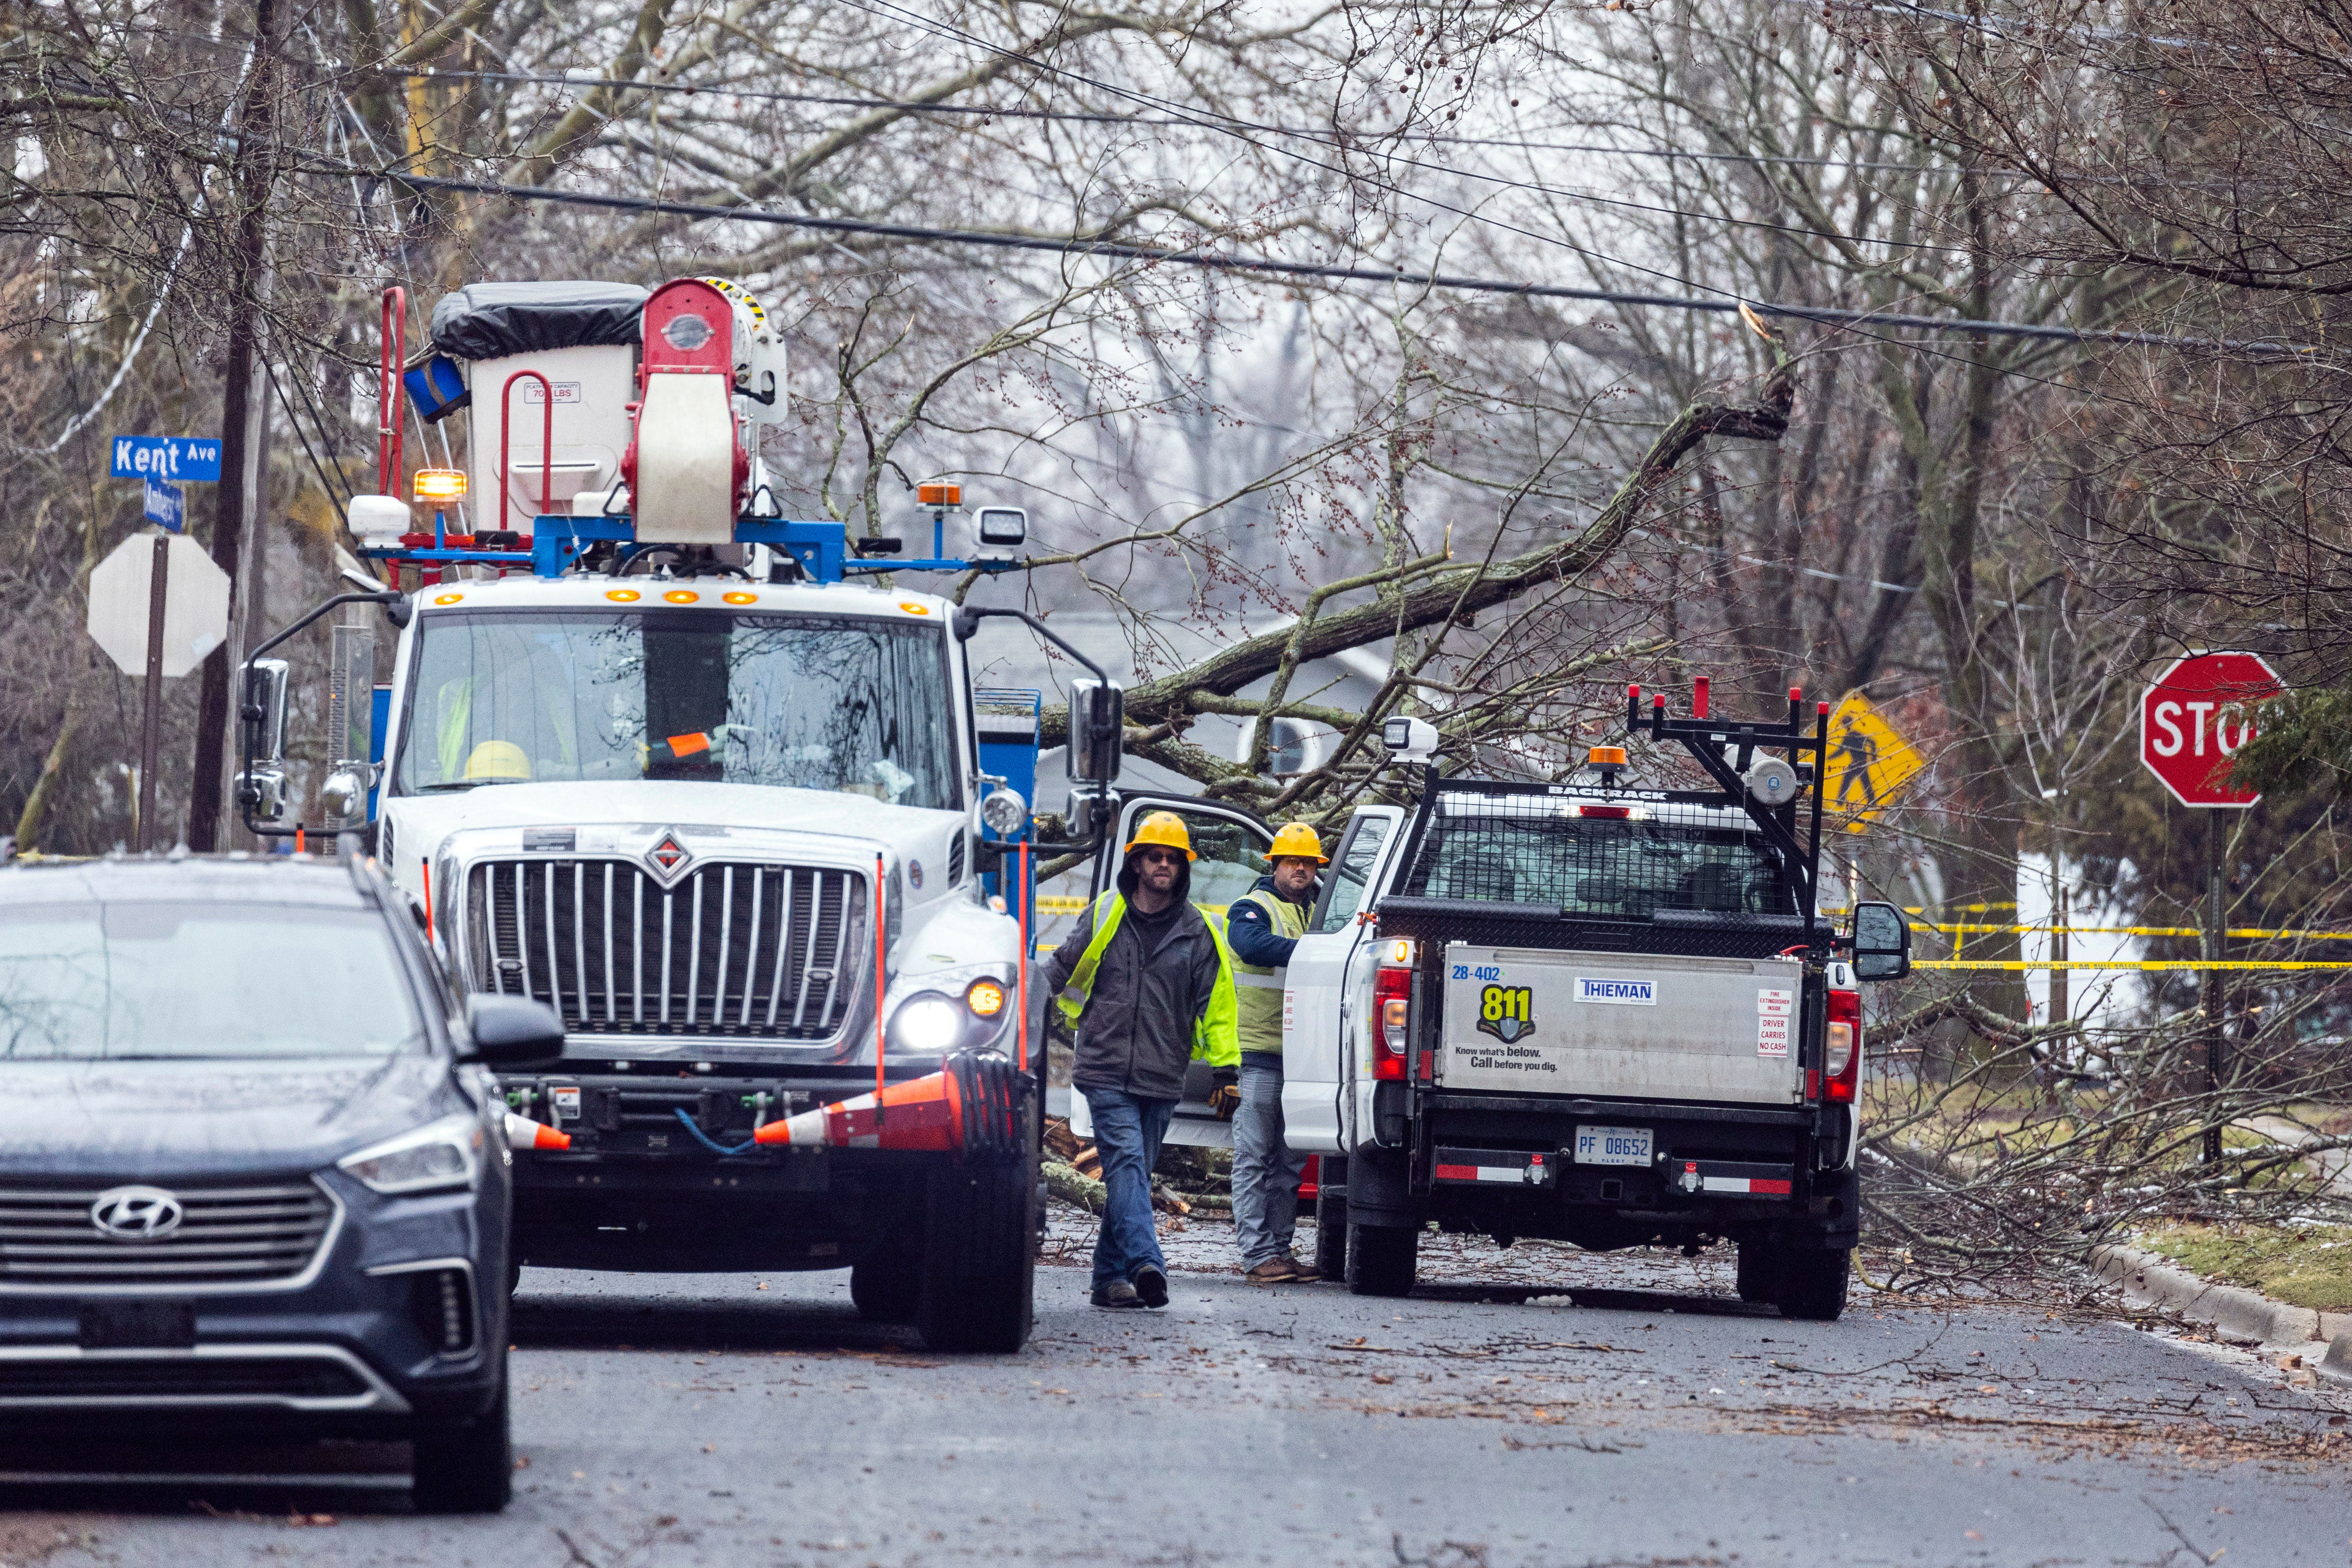 Consumers Energy works to repair lines and remove downed trees following an an ice storm in the Oakwood neighborhood in Kalamazoo.